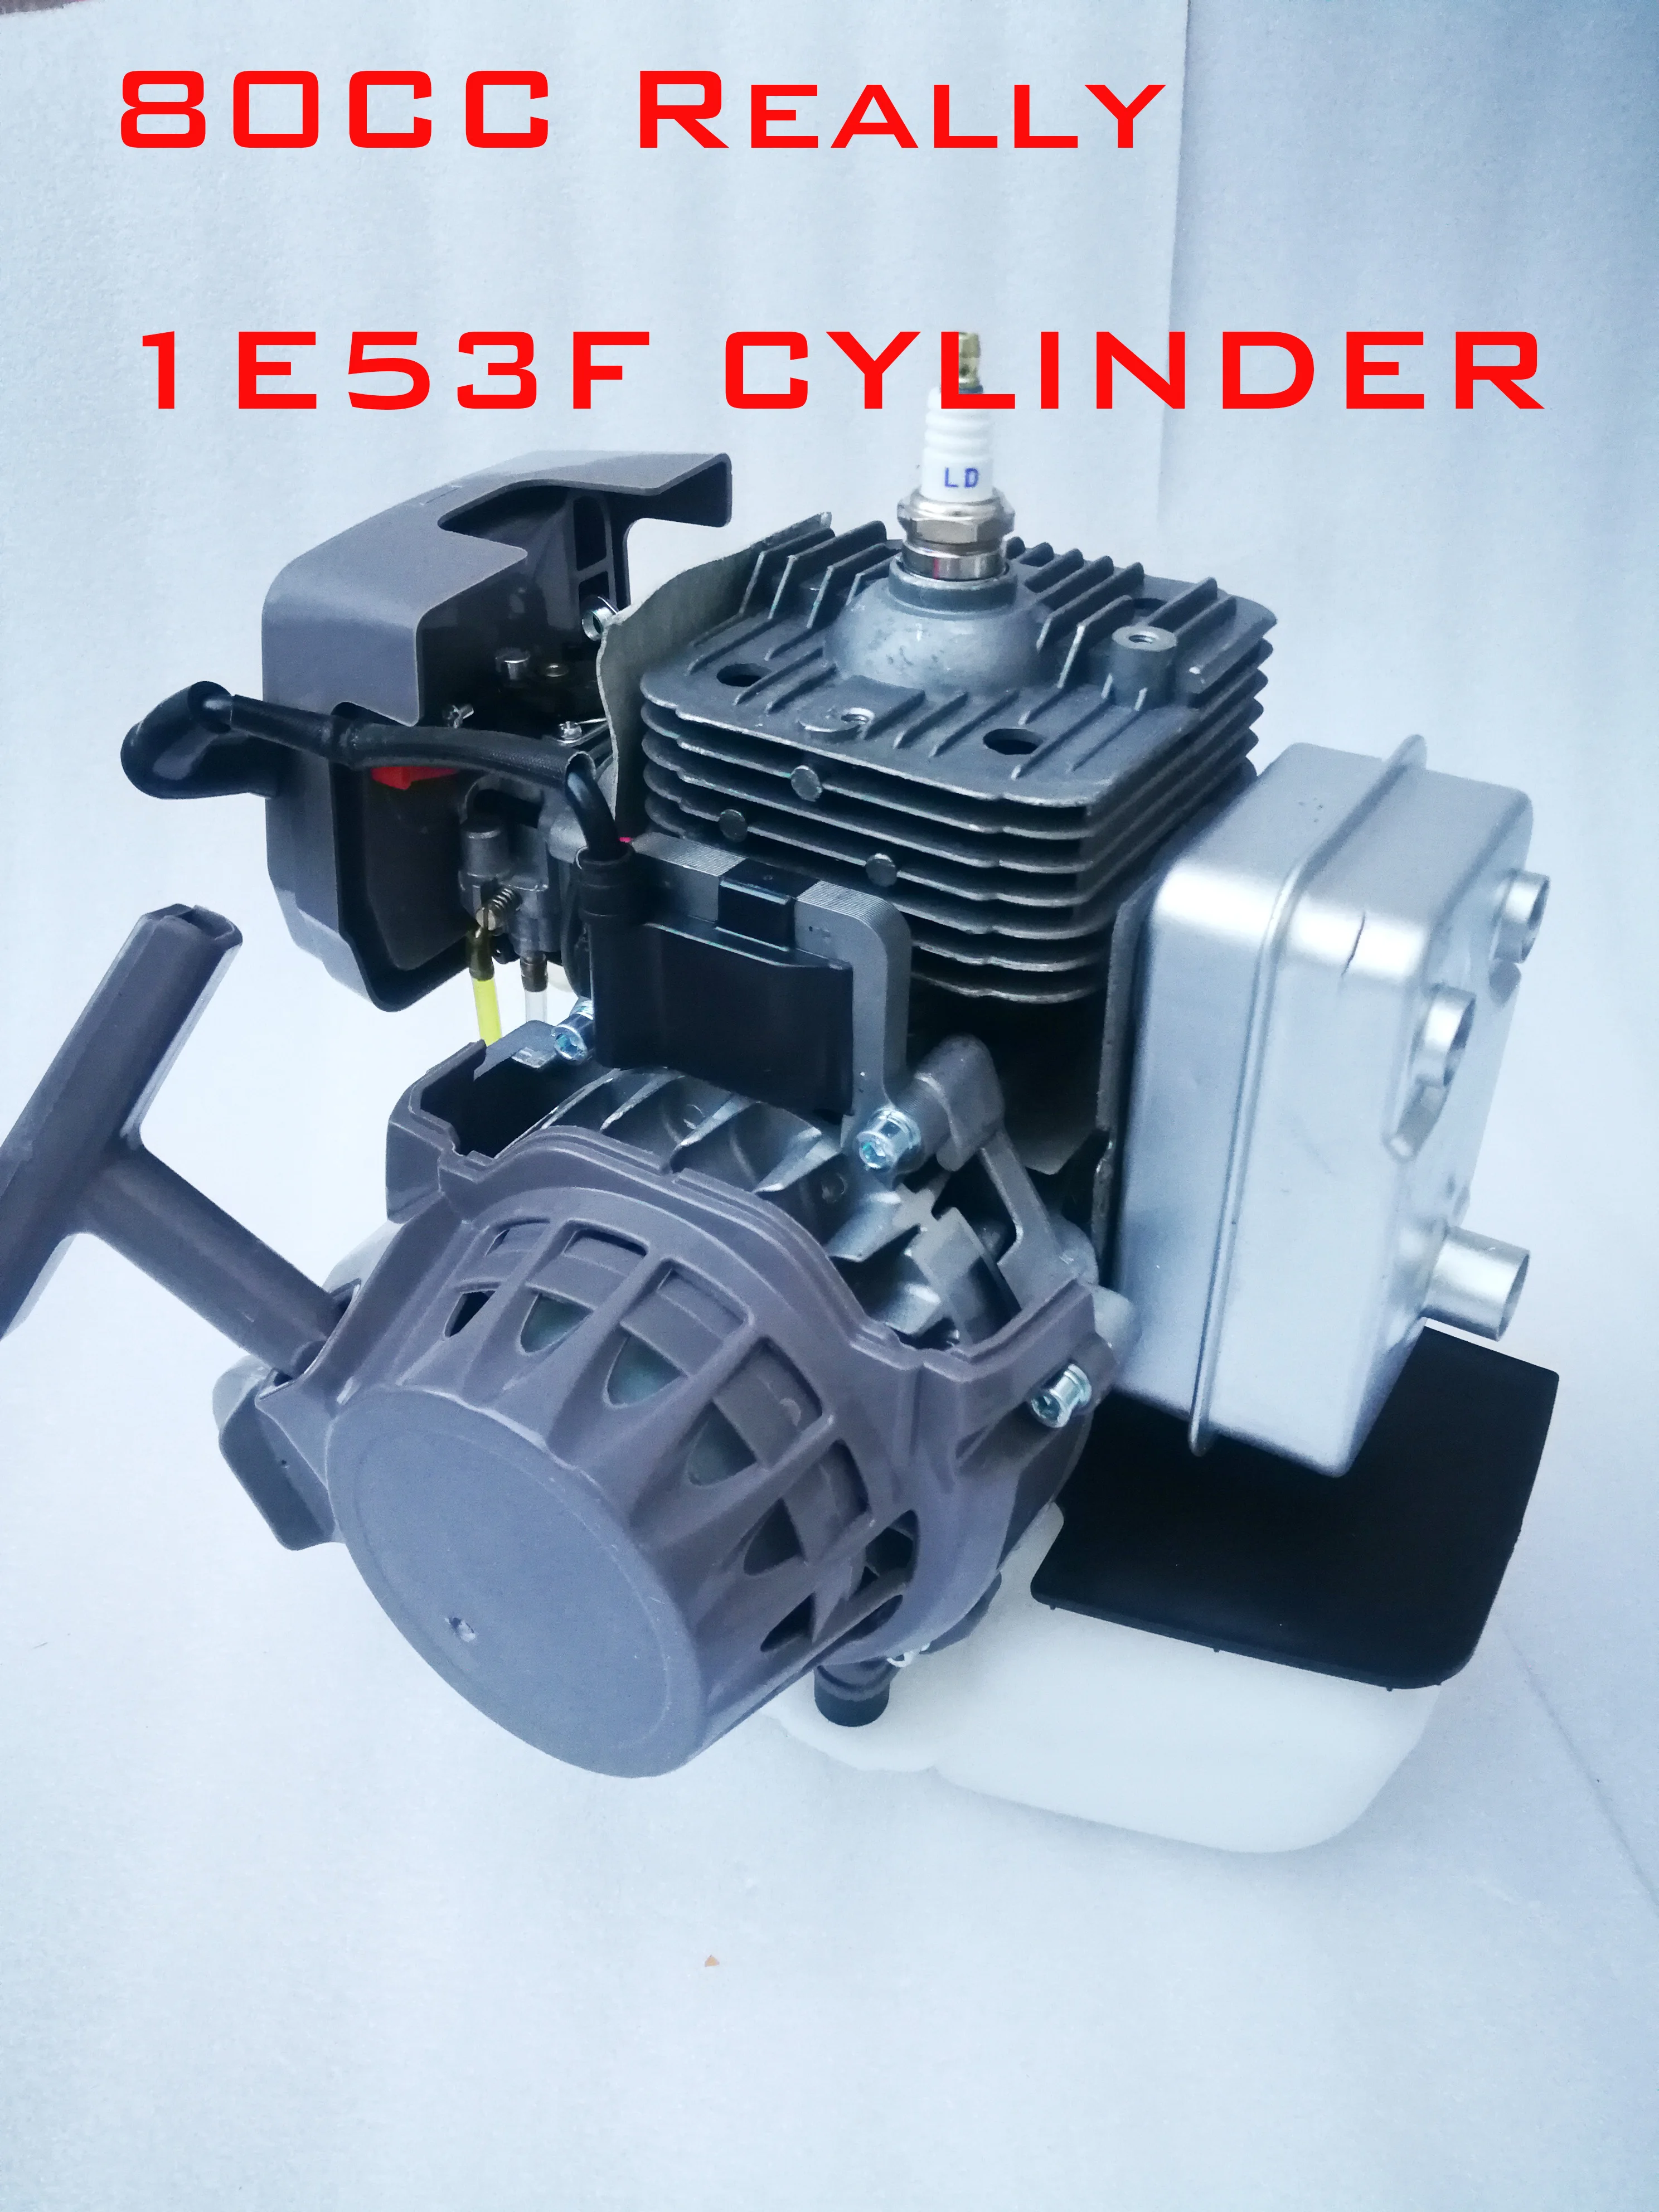 Really 80cc 1E53F 2T Gasoline Engine 2 Stroke For Earth Drill Brush Cutter Goped Scooter Outboard Motor Not 63cc Olive Shaker